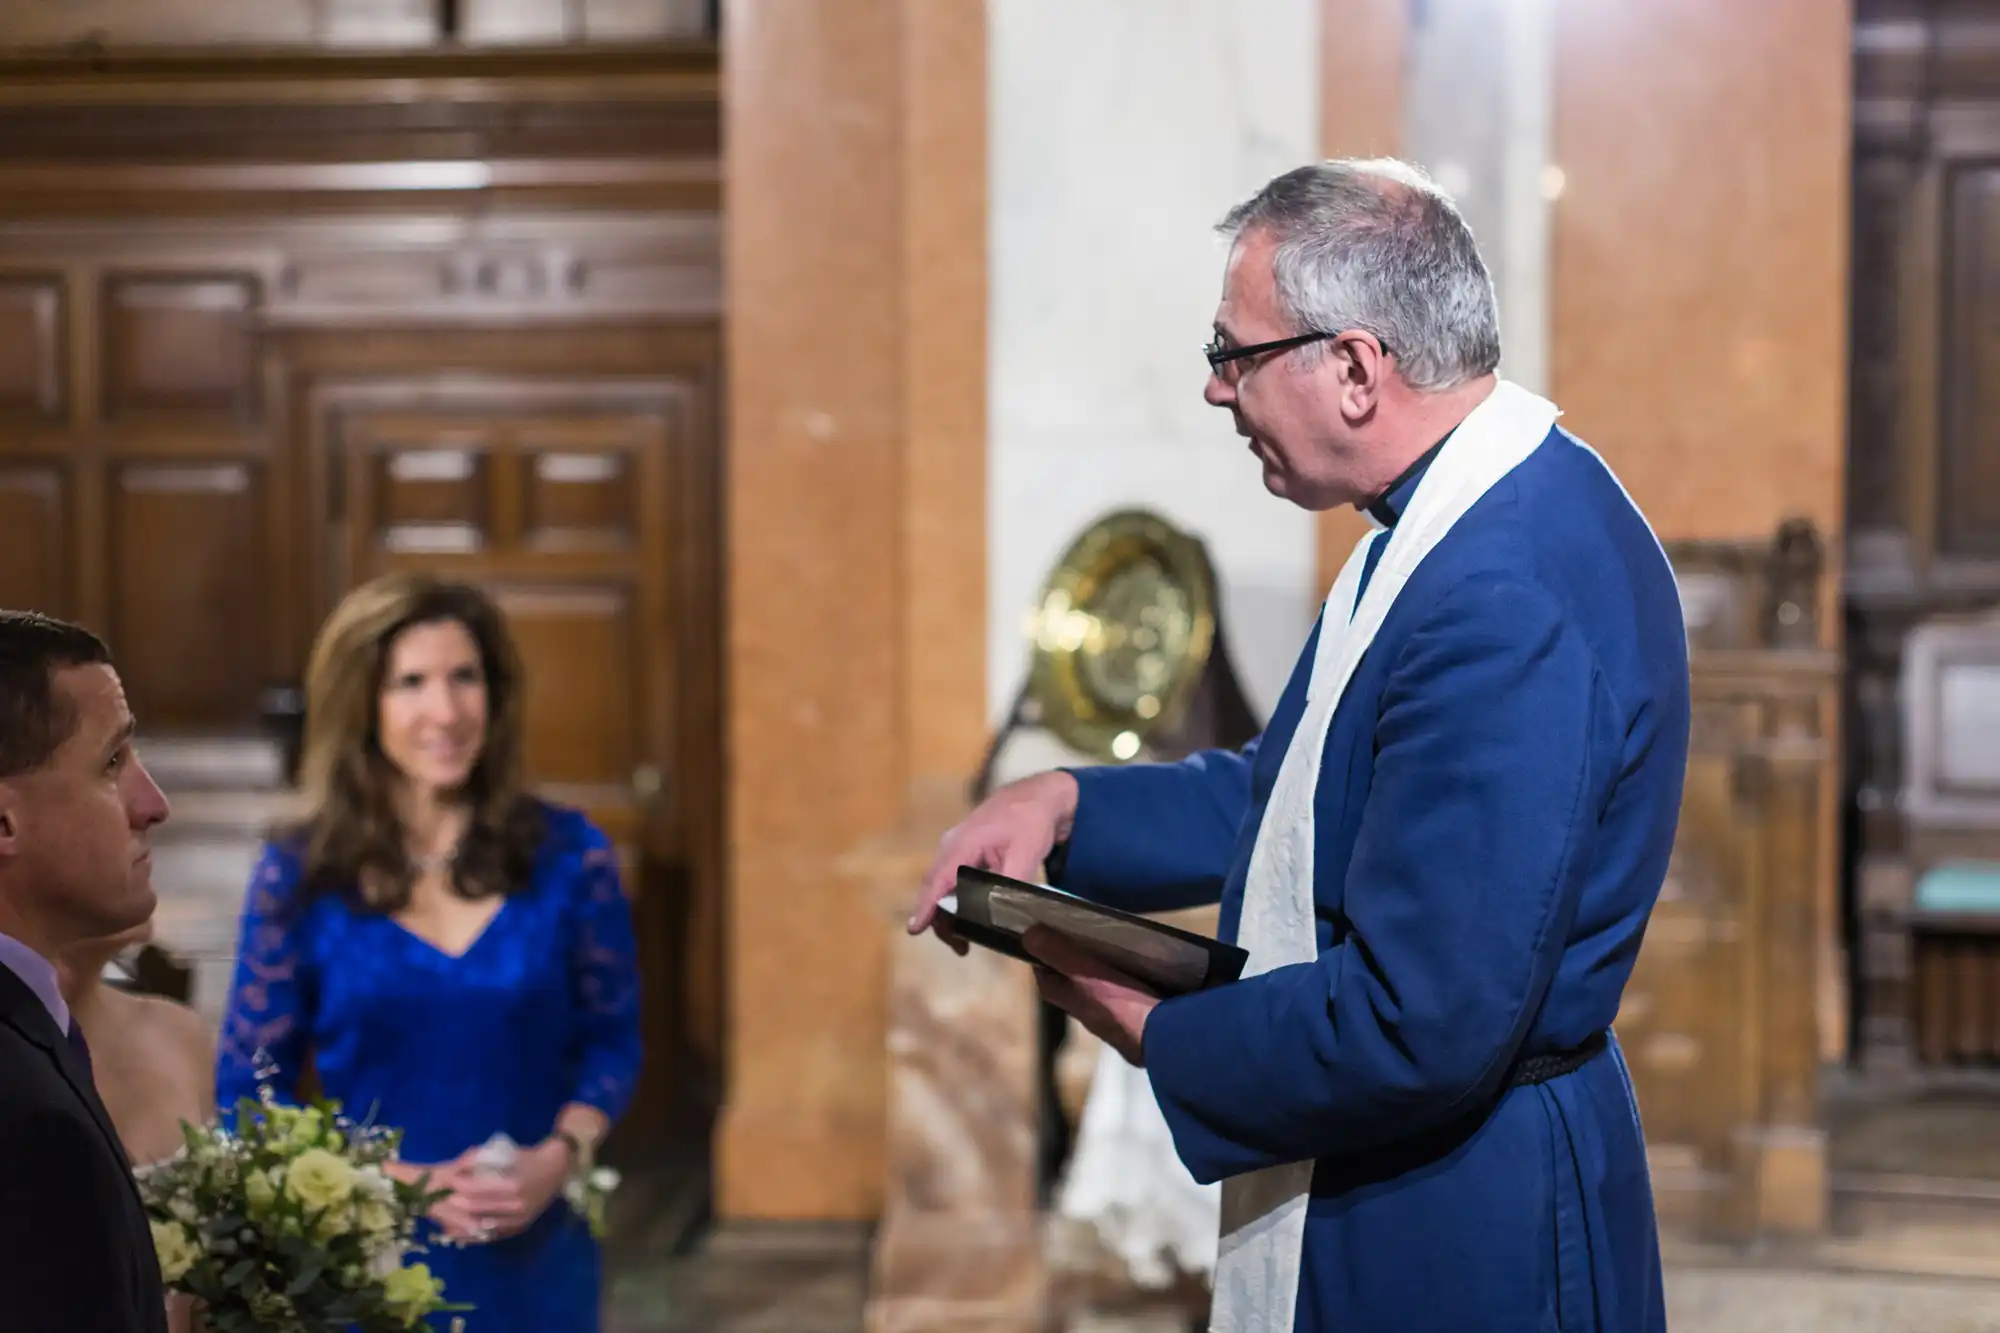 An older man in formal attire holding a book speaks to a couple in front of him inside a church, with a woman in a blue dress looking on.